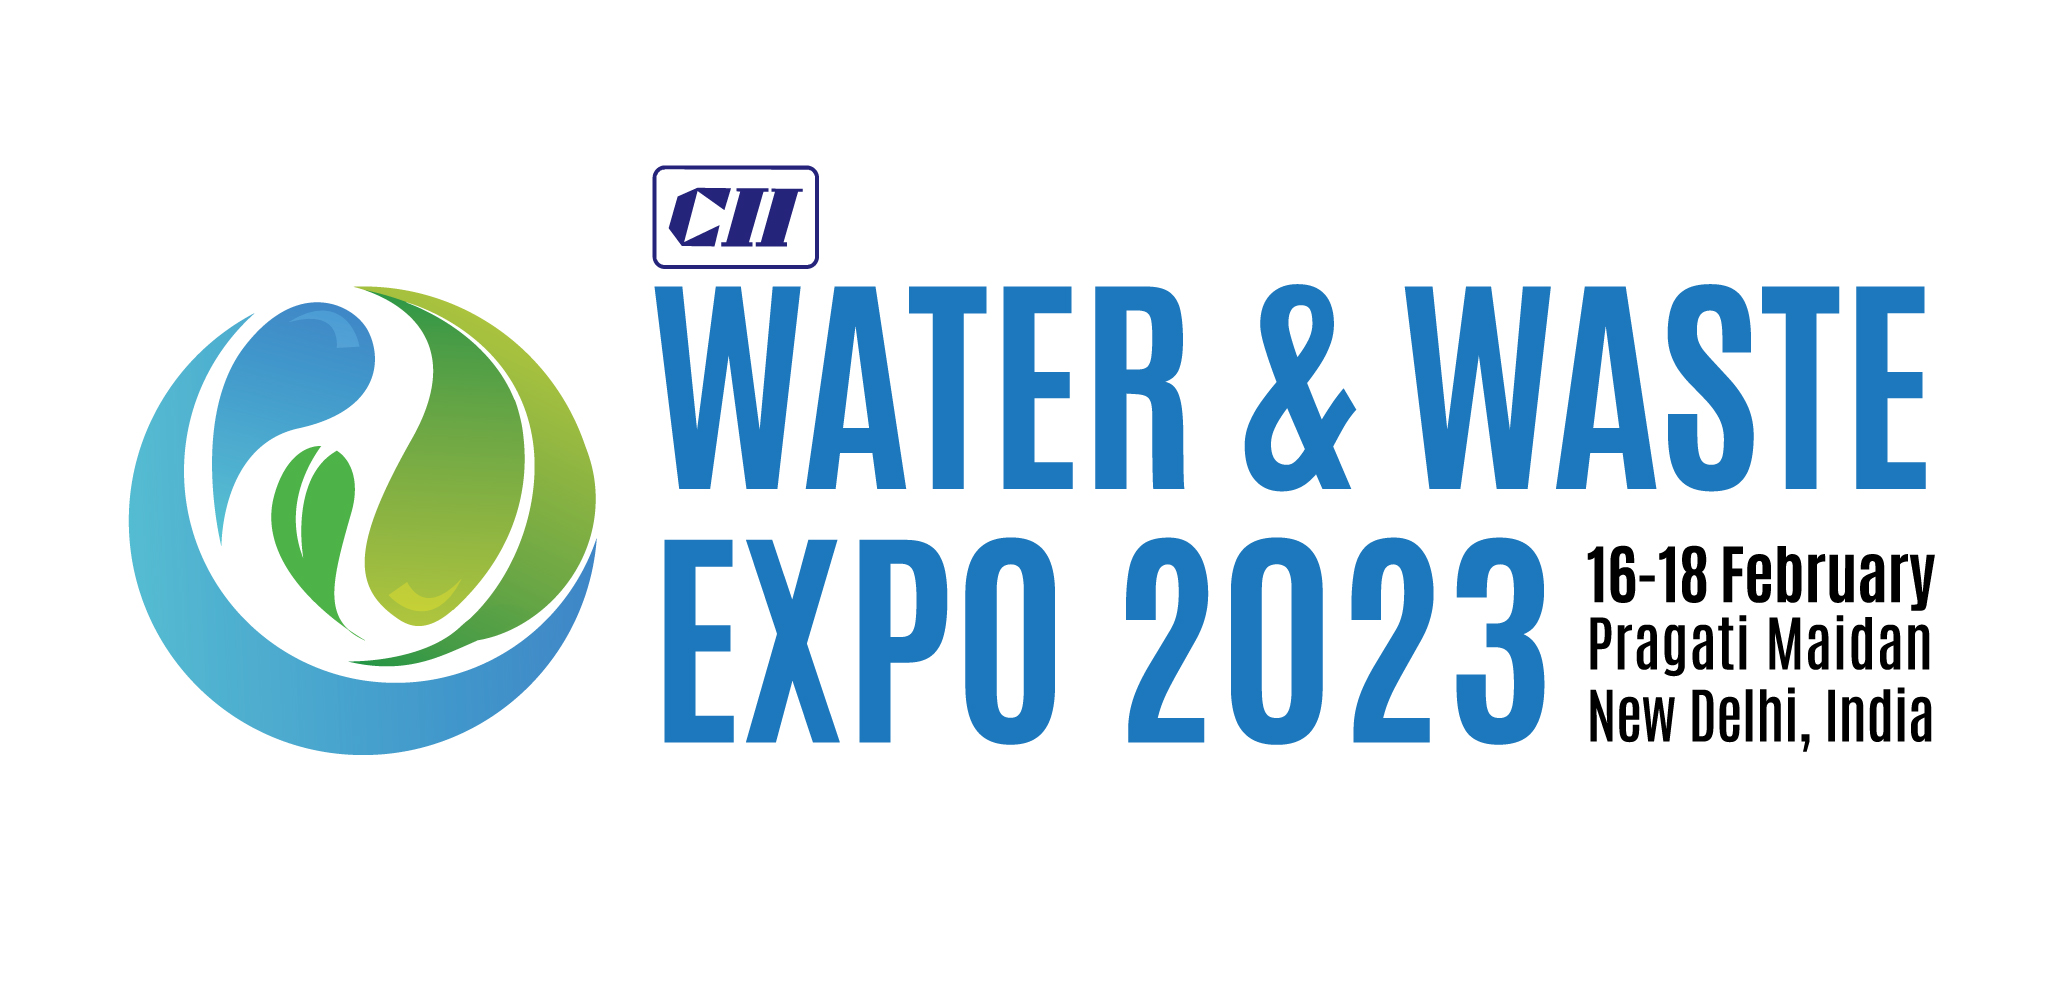 Water & Waste Expo